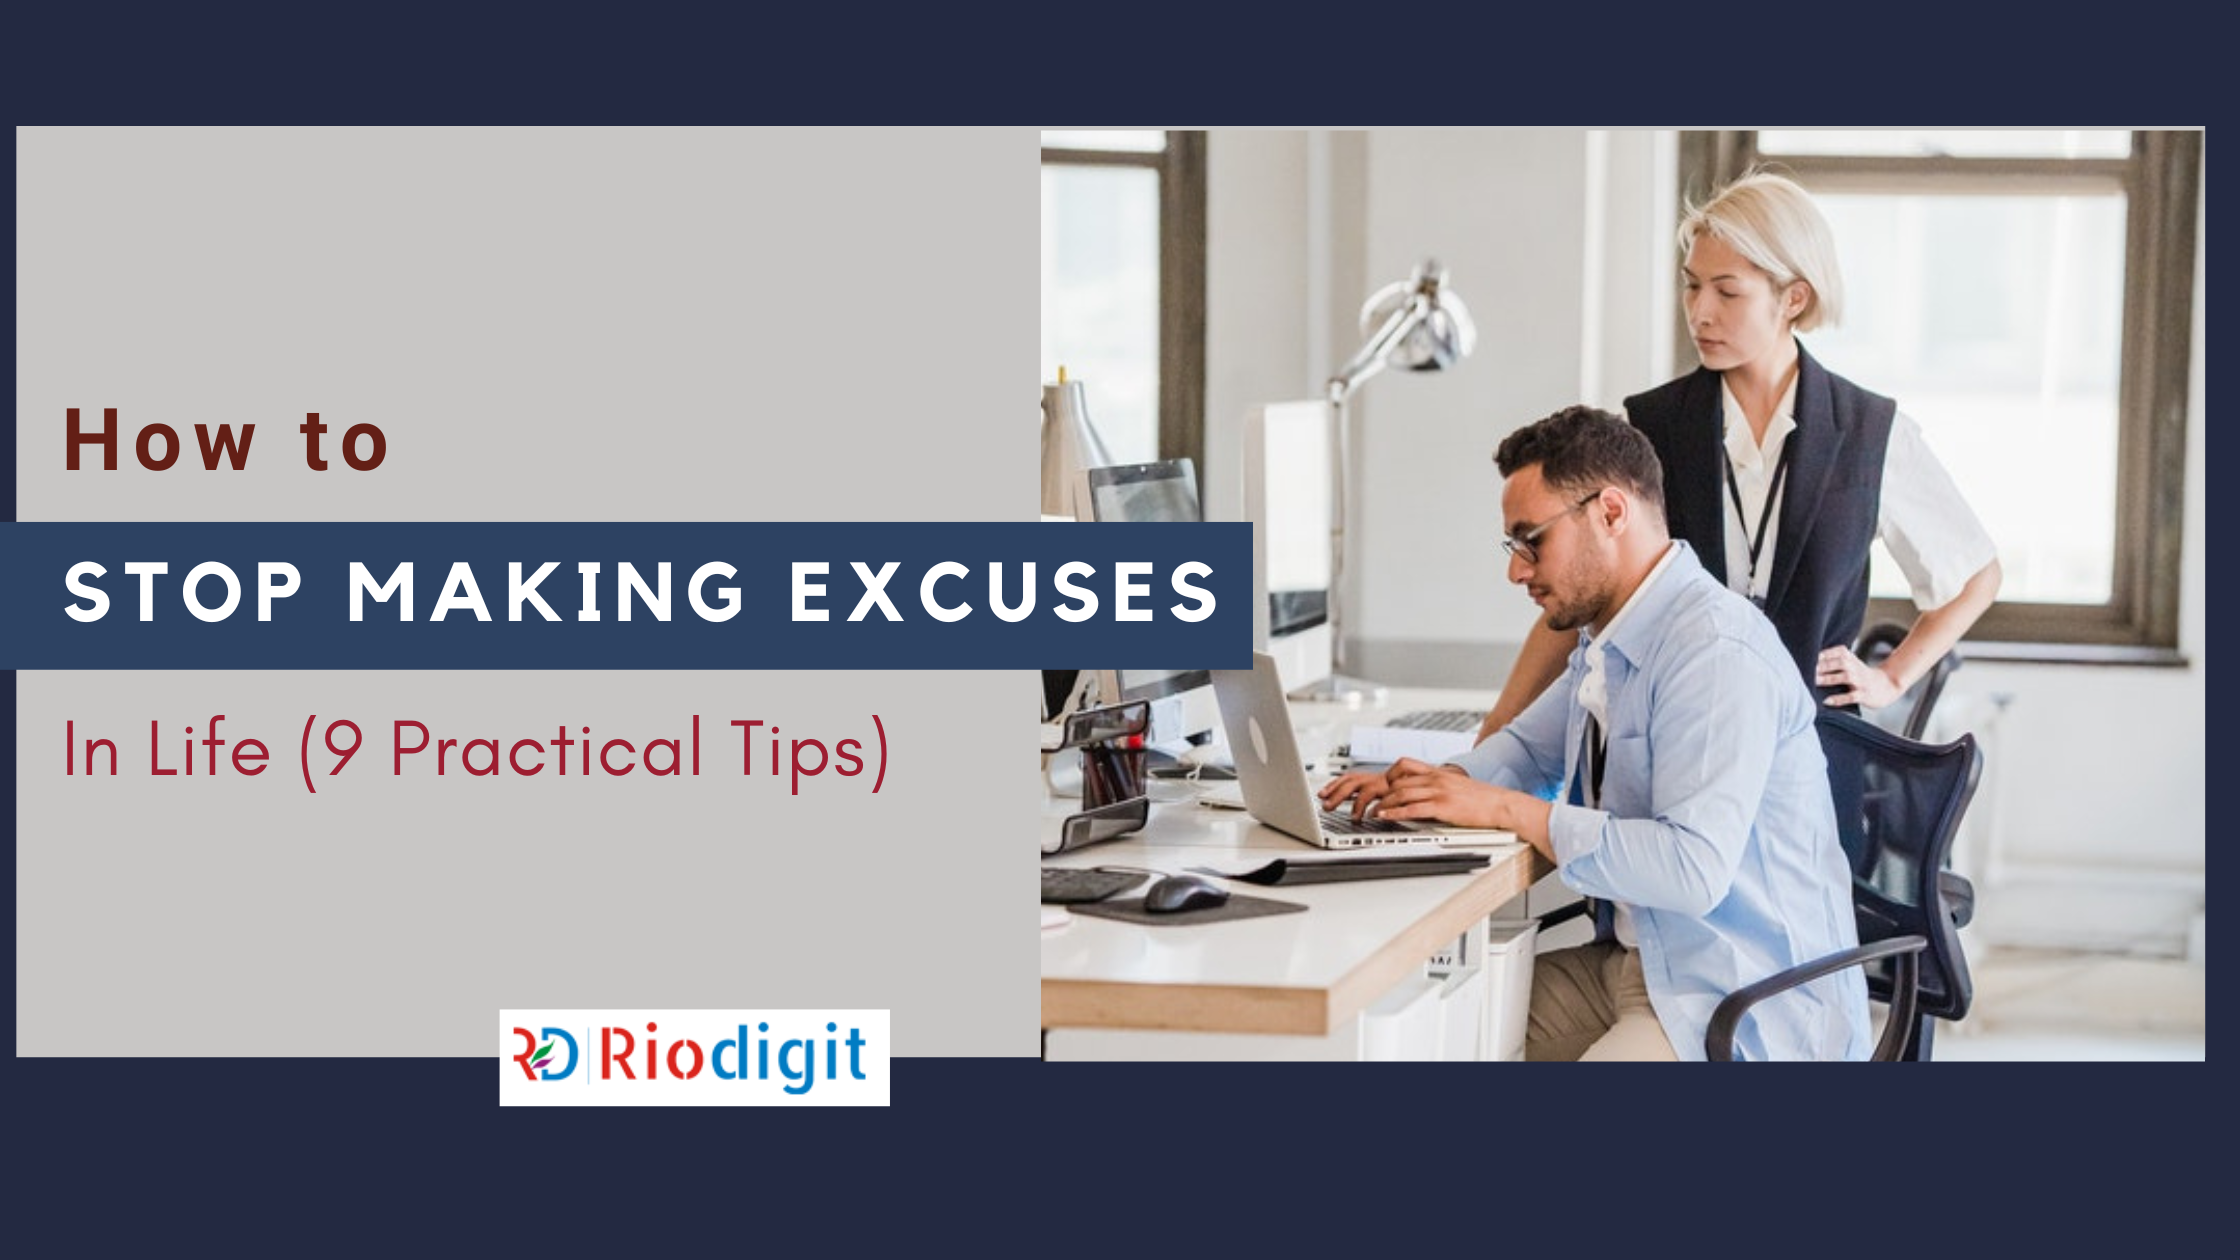 How to Stop Making Excuses